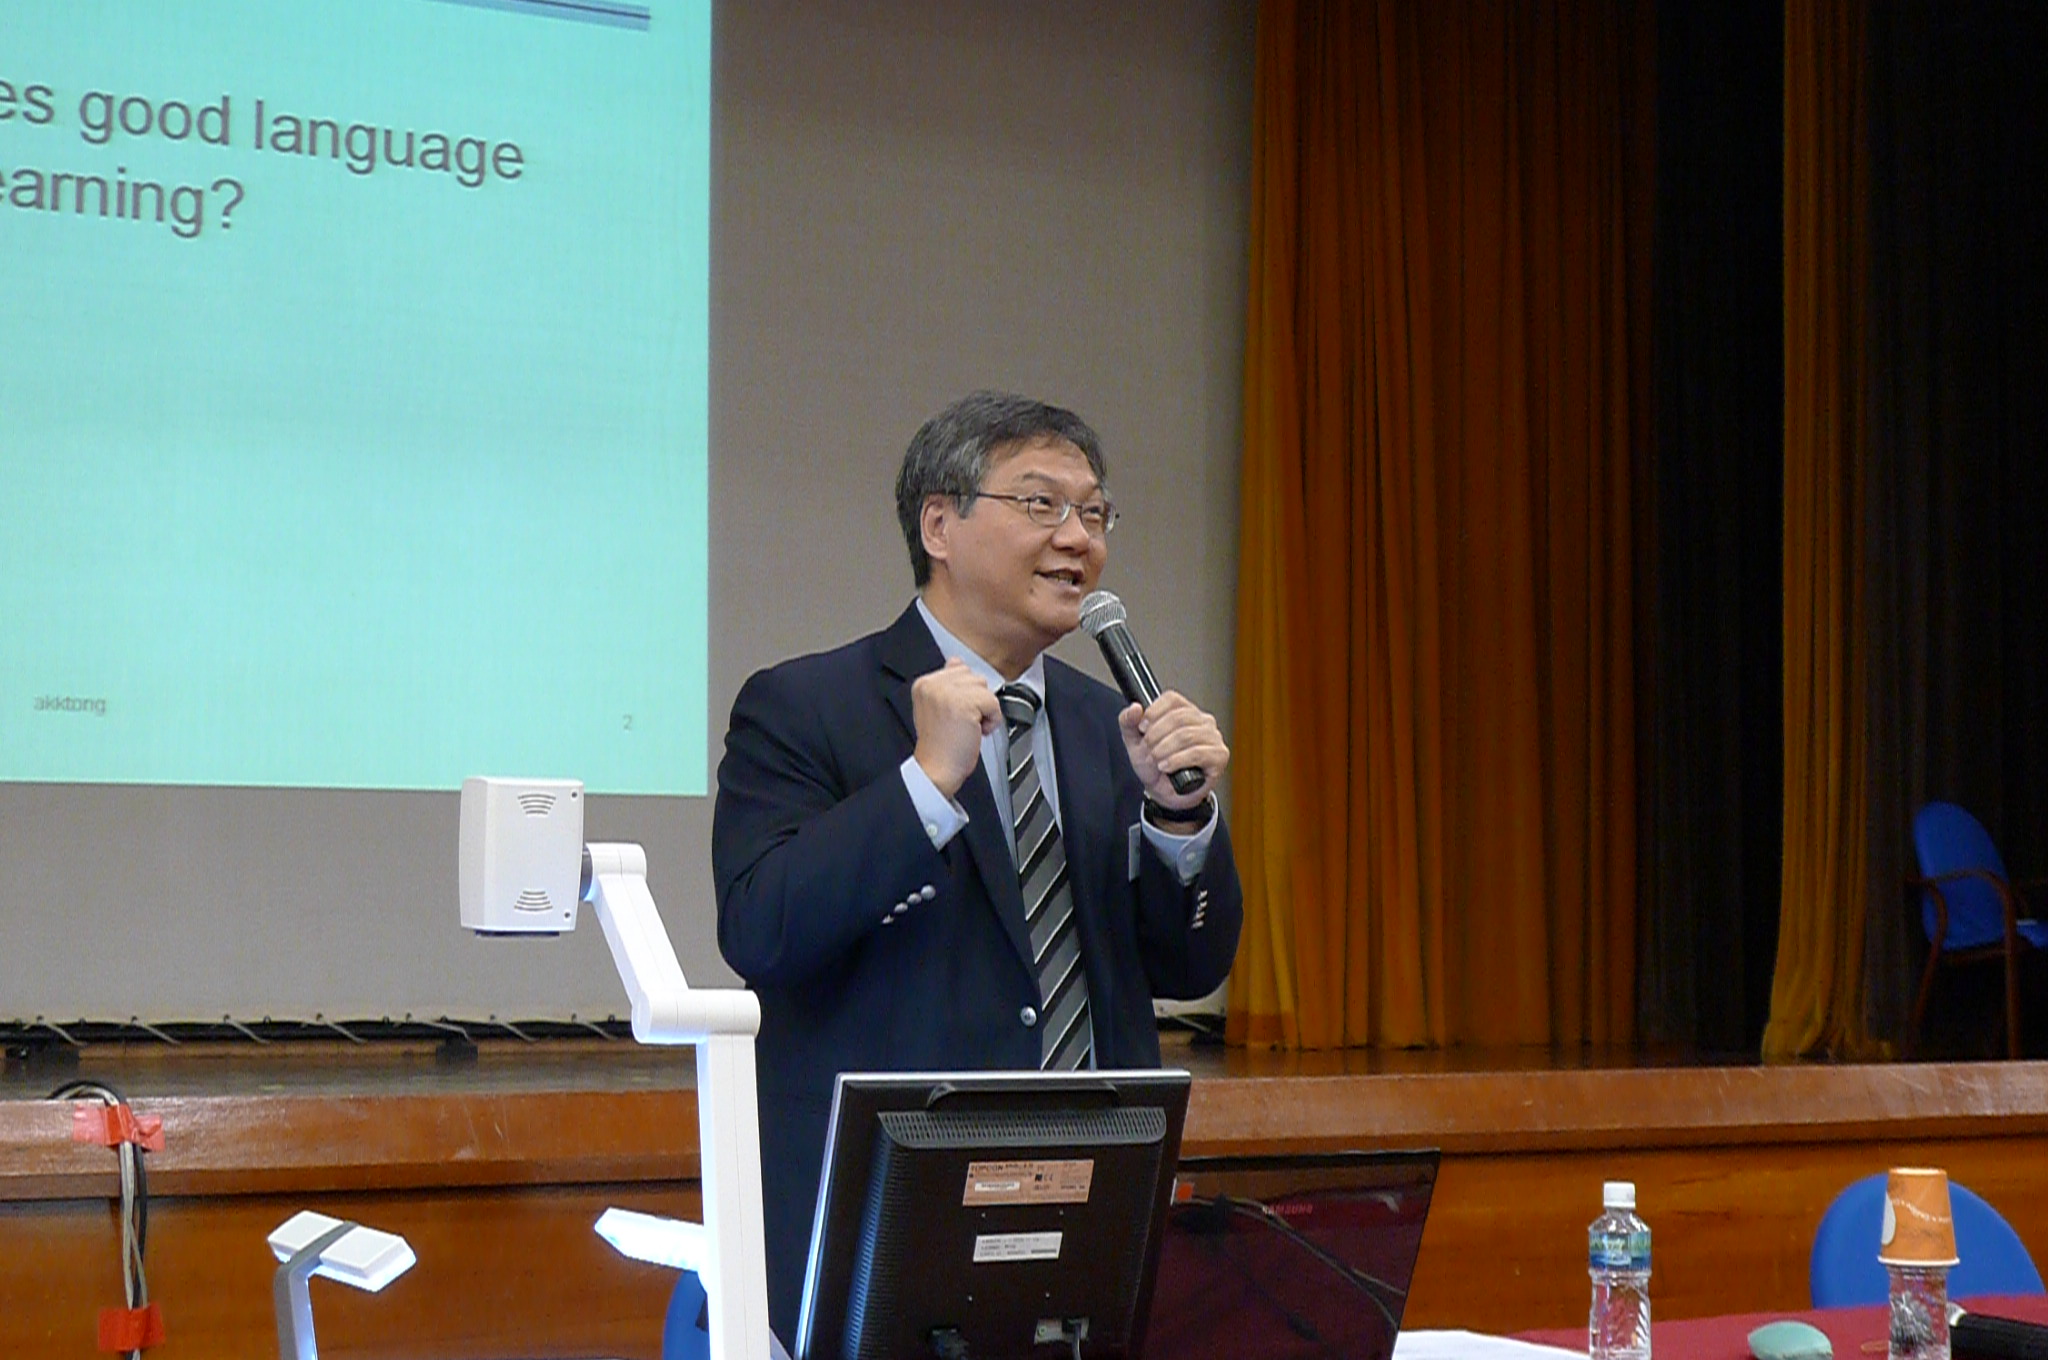 Dr K K Tong, Programme Director, Bachelor of Arts & Bachelor of Education (Language Education); and Teaching Fellow, Faculty of Education, The University of Hong Kong 